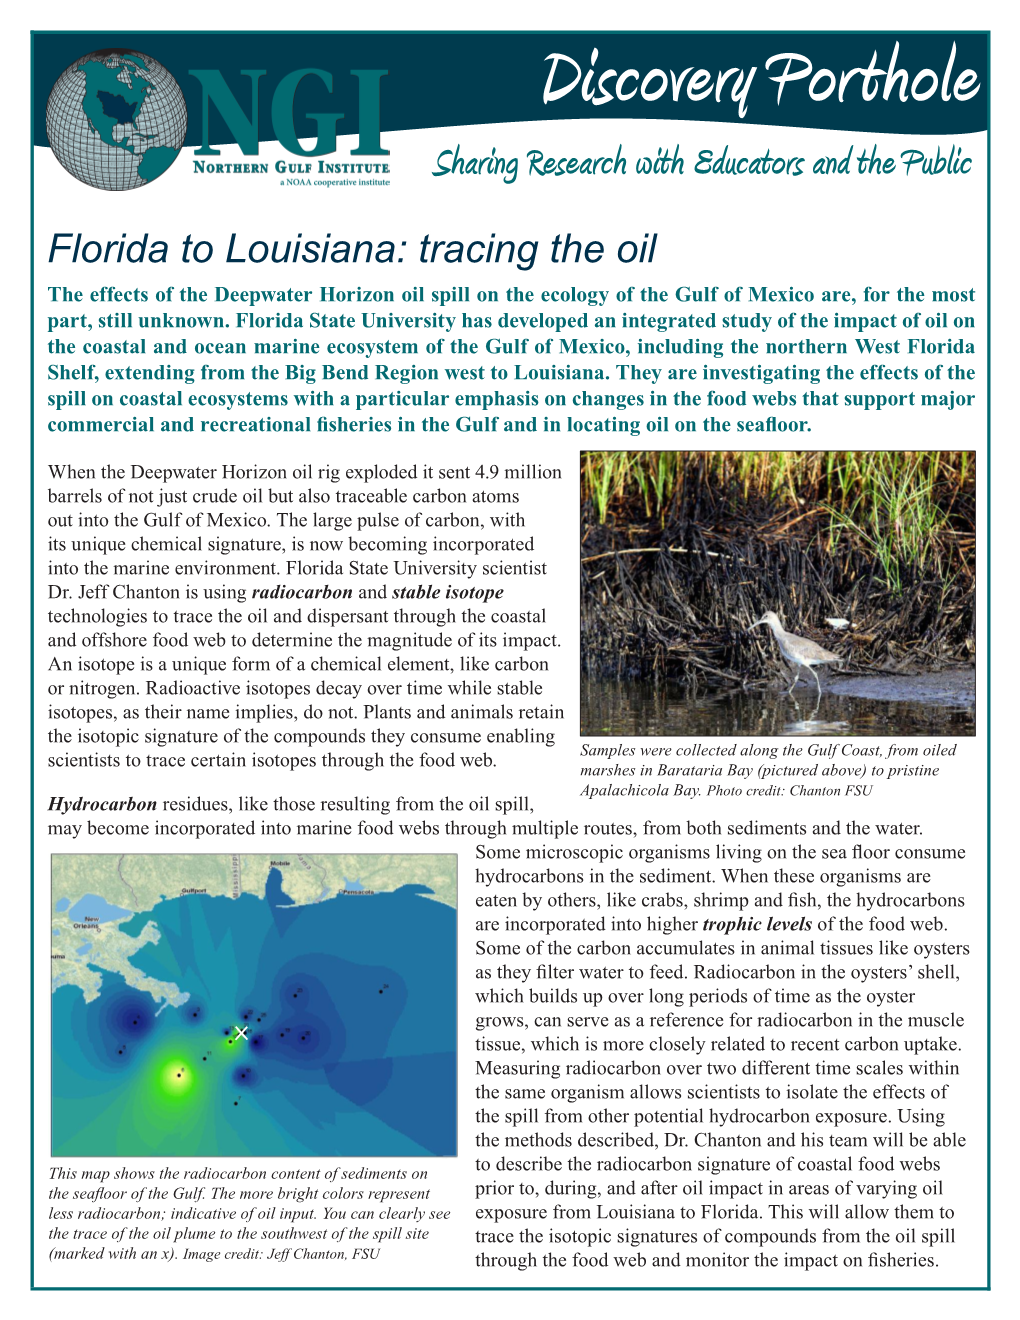 Florida to Louisiana: Tracing the Oil the Effects of the Deepwater Horizon Oil Spill on the Ecology of the Gulf of Mexico Are, for the Most Part, Still Unknown